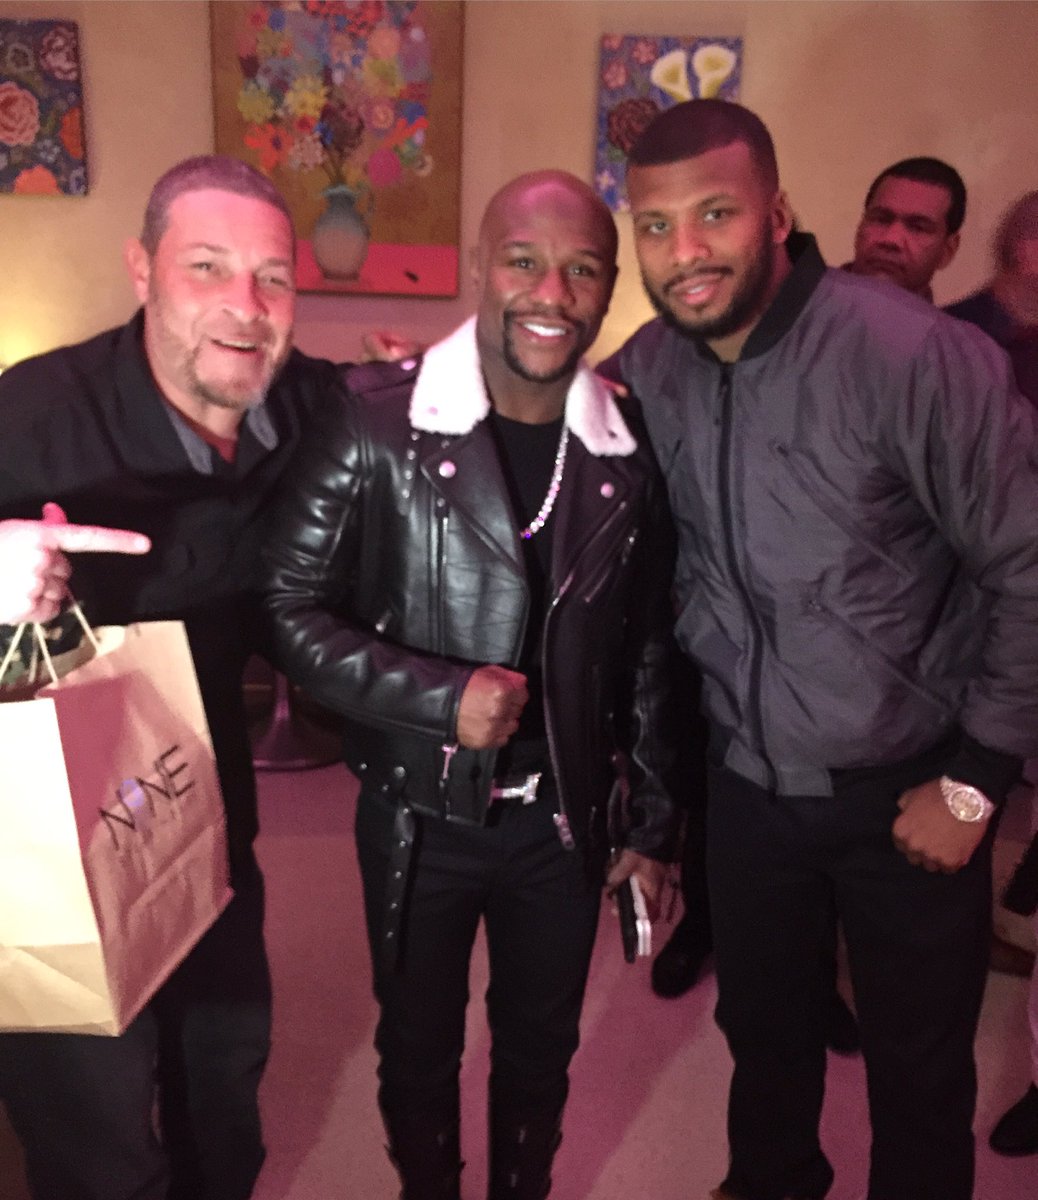 RT @BadouJack: With my trainer Lou Delvalle & @floydmayweather at his bday party last night. #TeamJack #AndStill https://t.co/7el5OOxApq